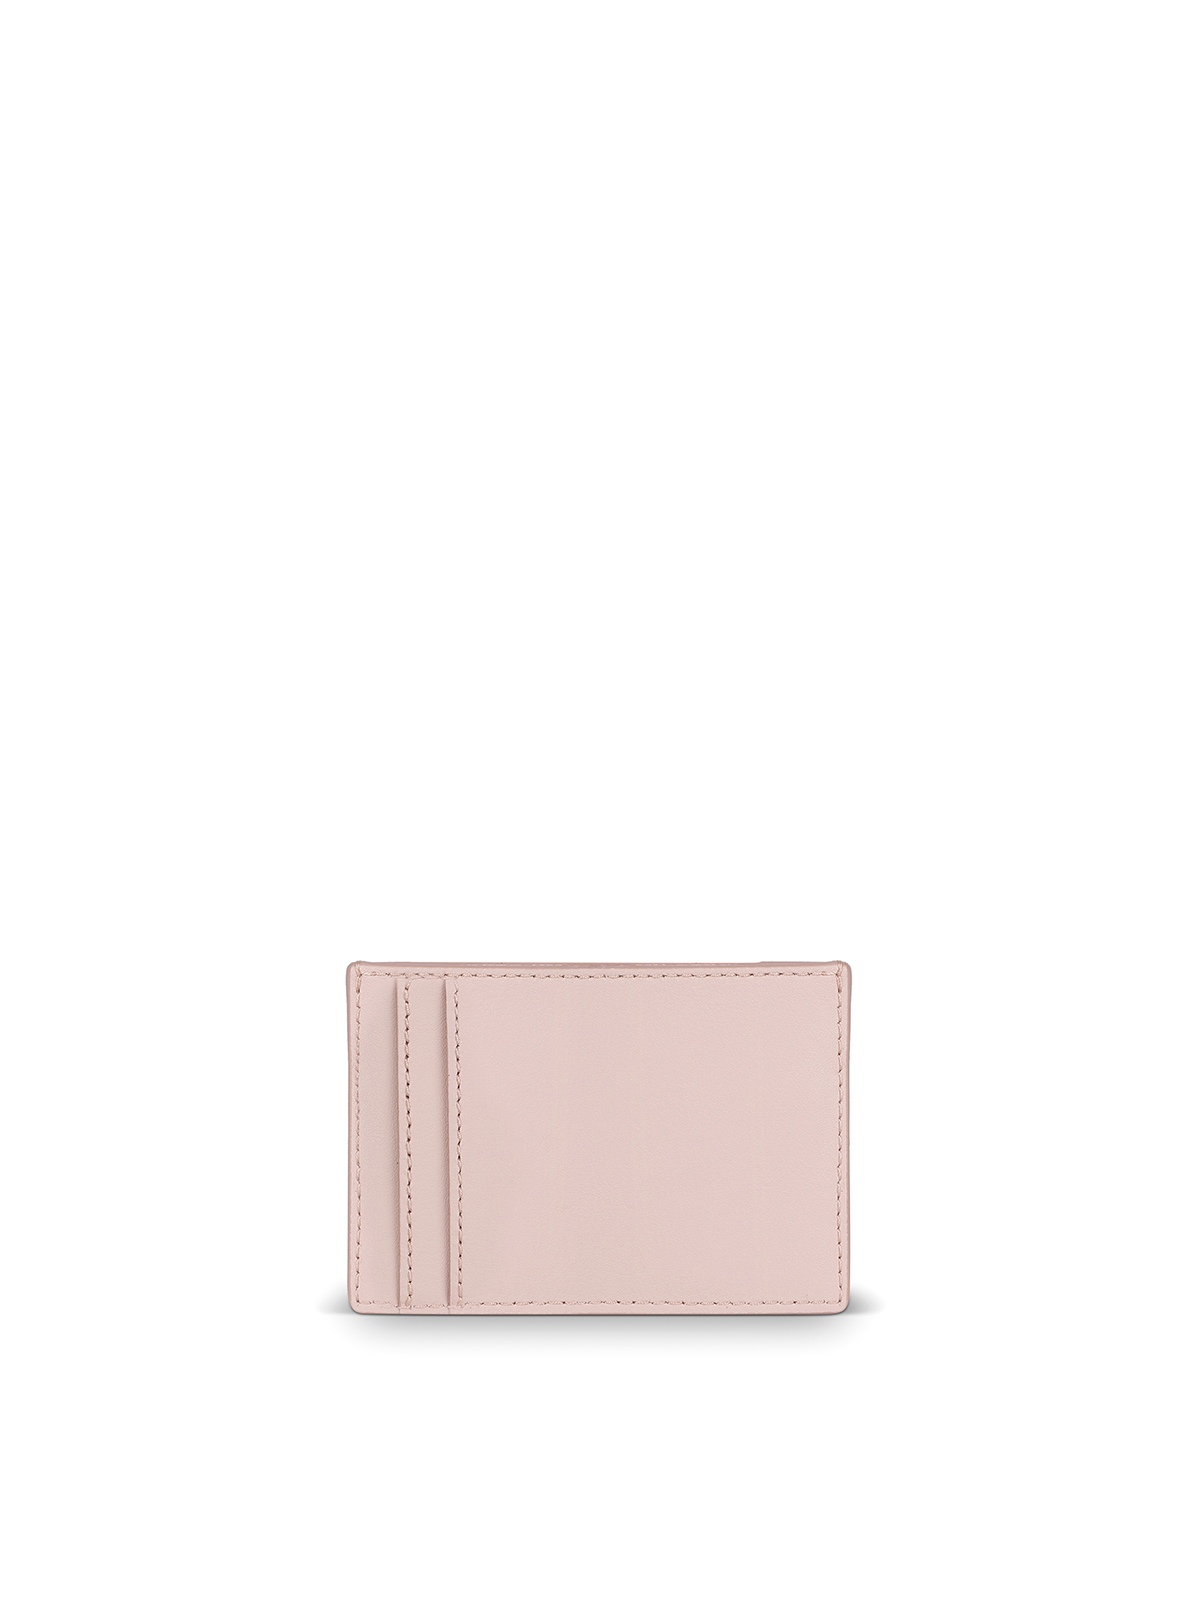 droefheid Analytisch Pakistan Wallets & purses Marc Jacobs - Card holder The card holder - 2S3SMP006S01624